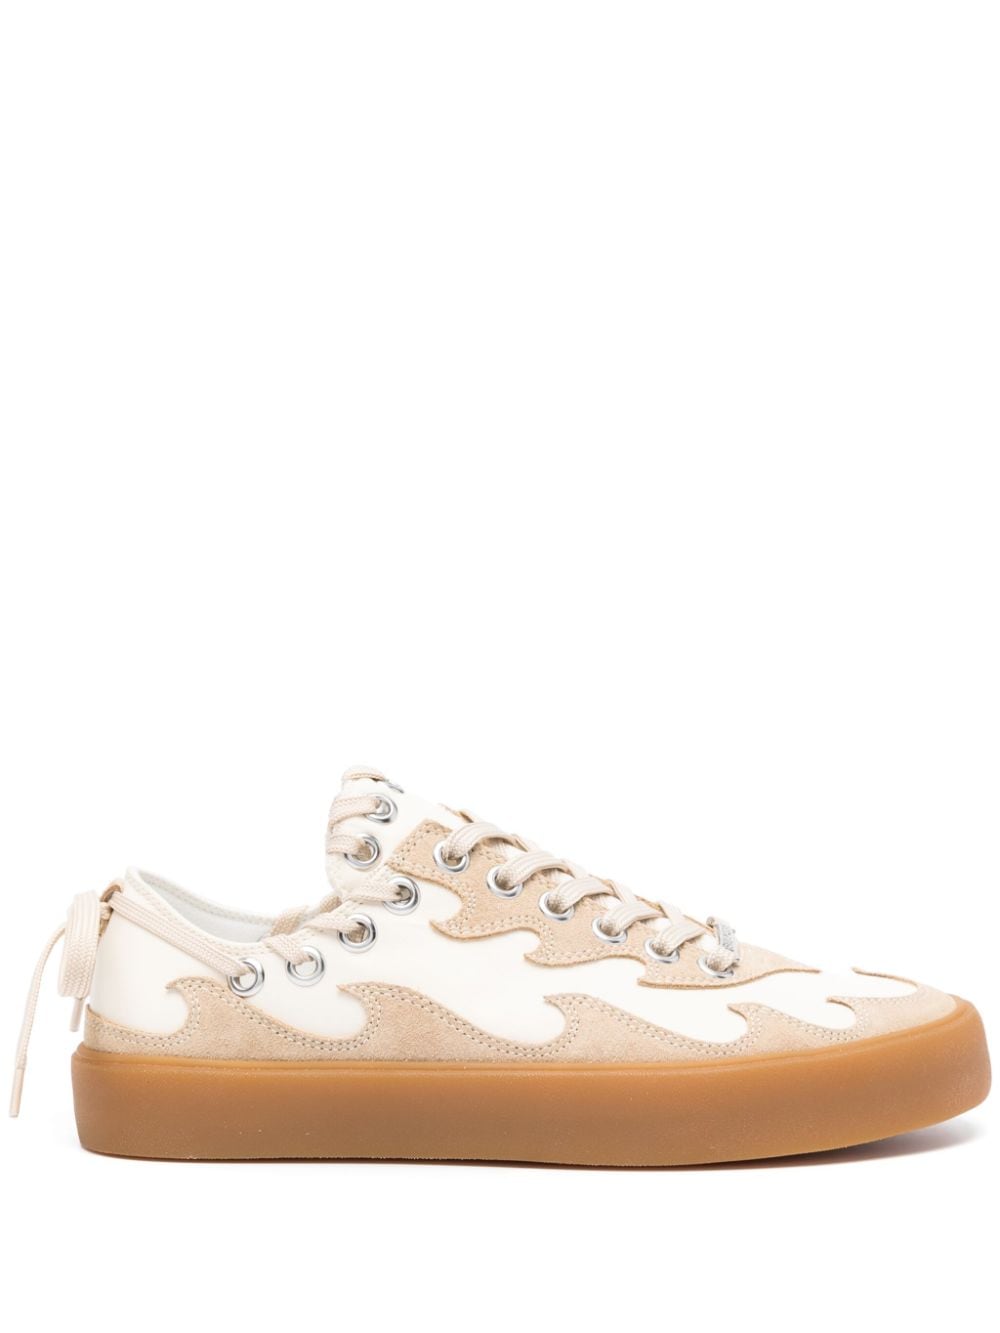 Bluemarble Men's Tan Cut-out Sneaker With Flame Print And Flatform Sole In Beige